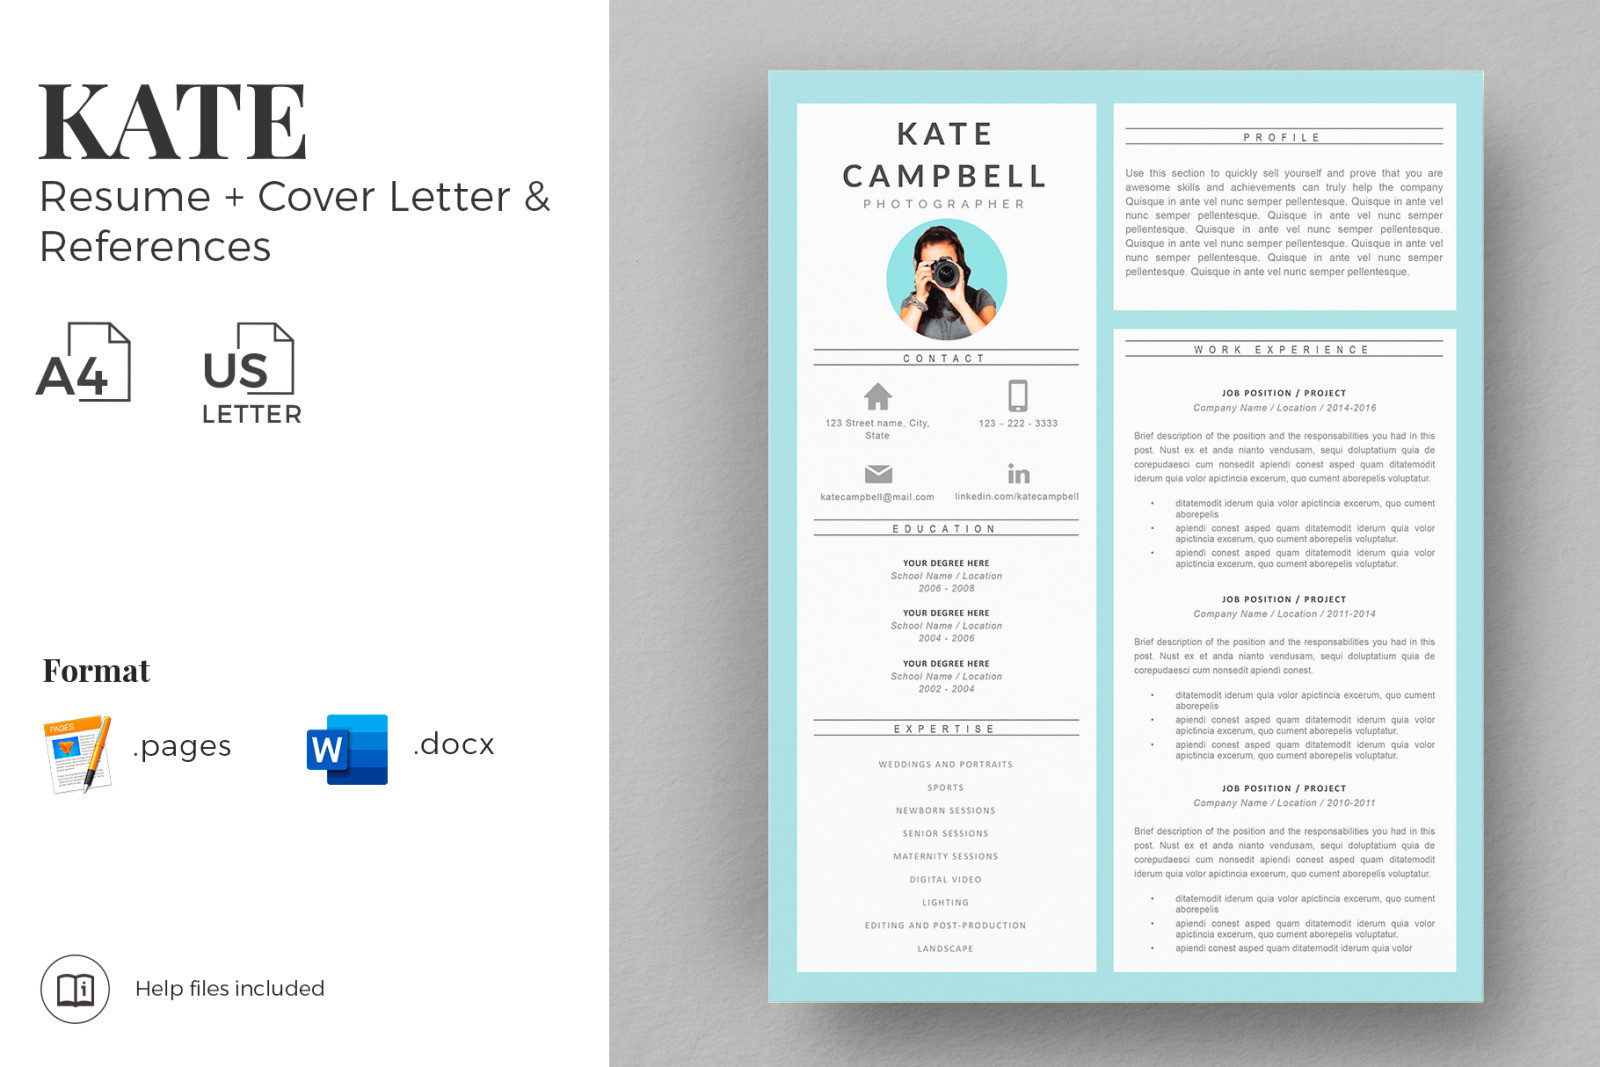 Free Matching Resume and Cover Letter Templates Creative Resume, Cv Design & Matching Cover Letter   References …